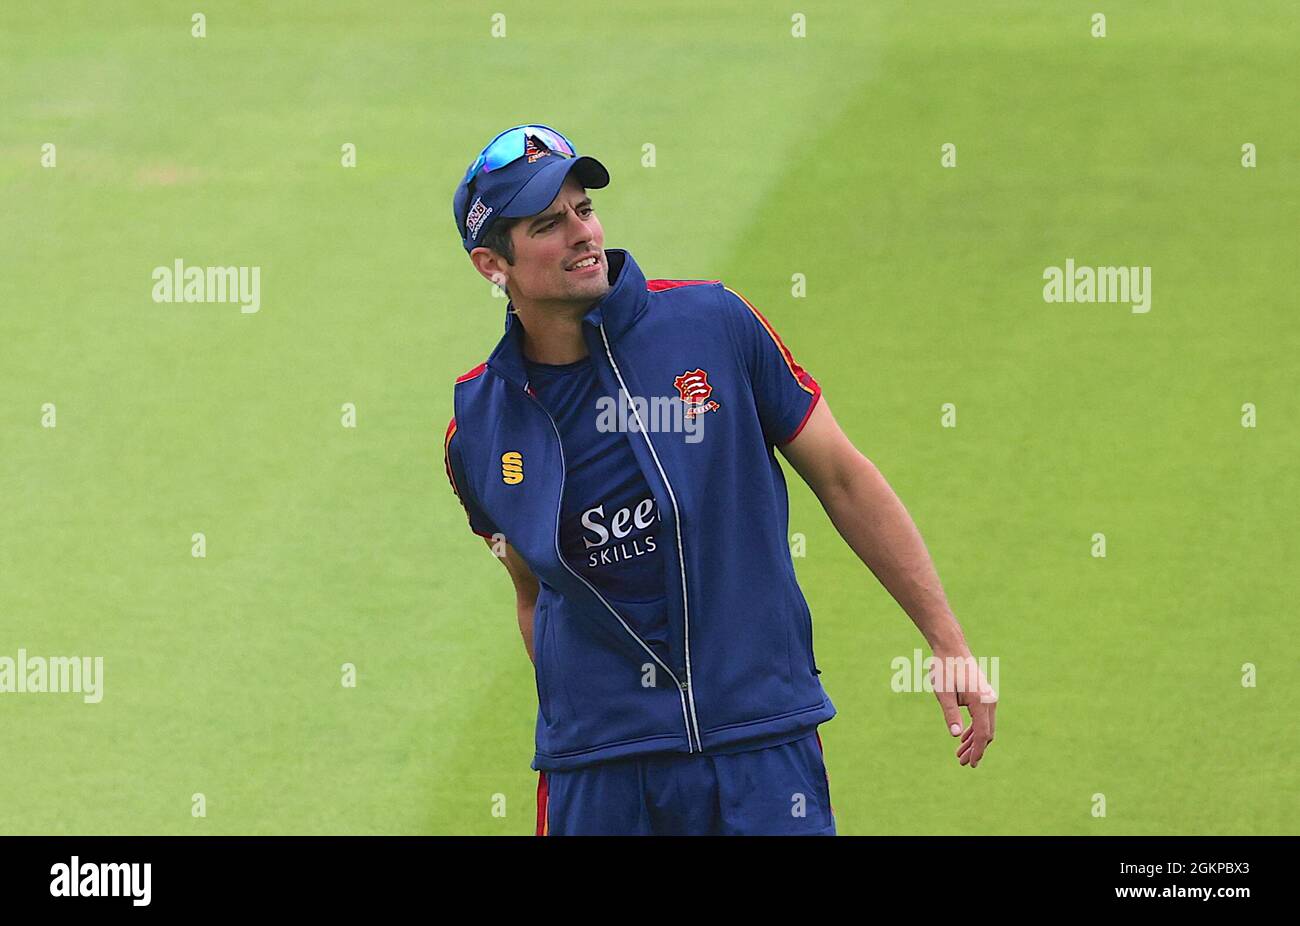 15 September, 2021. London, UK. Alastair Cook of Essex looking relaxed before the start of play as Surrey take on Essex in the County Championship at the Kia Oval, day three David Rowe/Alamy Live News Stock Photo